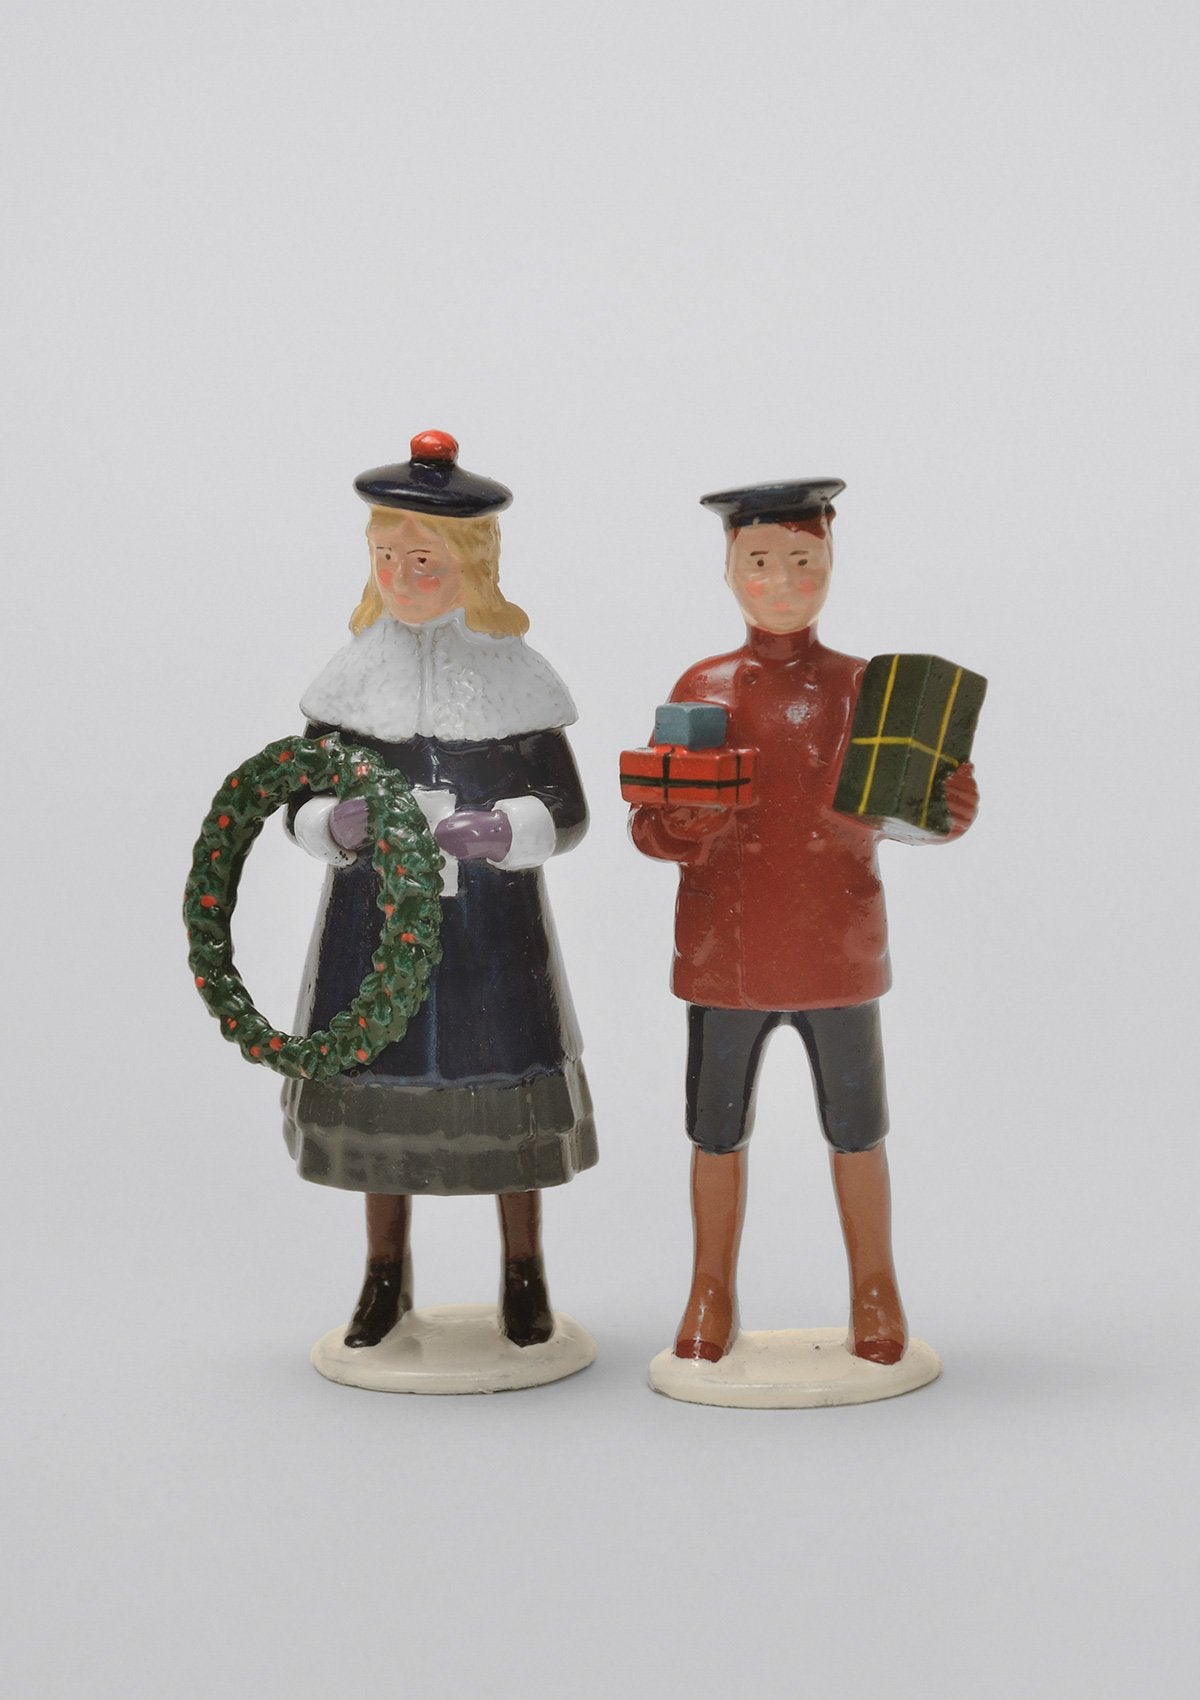 Set 35 Yuletide | Victorian Children Festive | Town and Around | © Imperial Productions | Sculpt by David Cowe